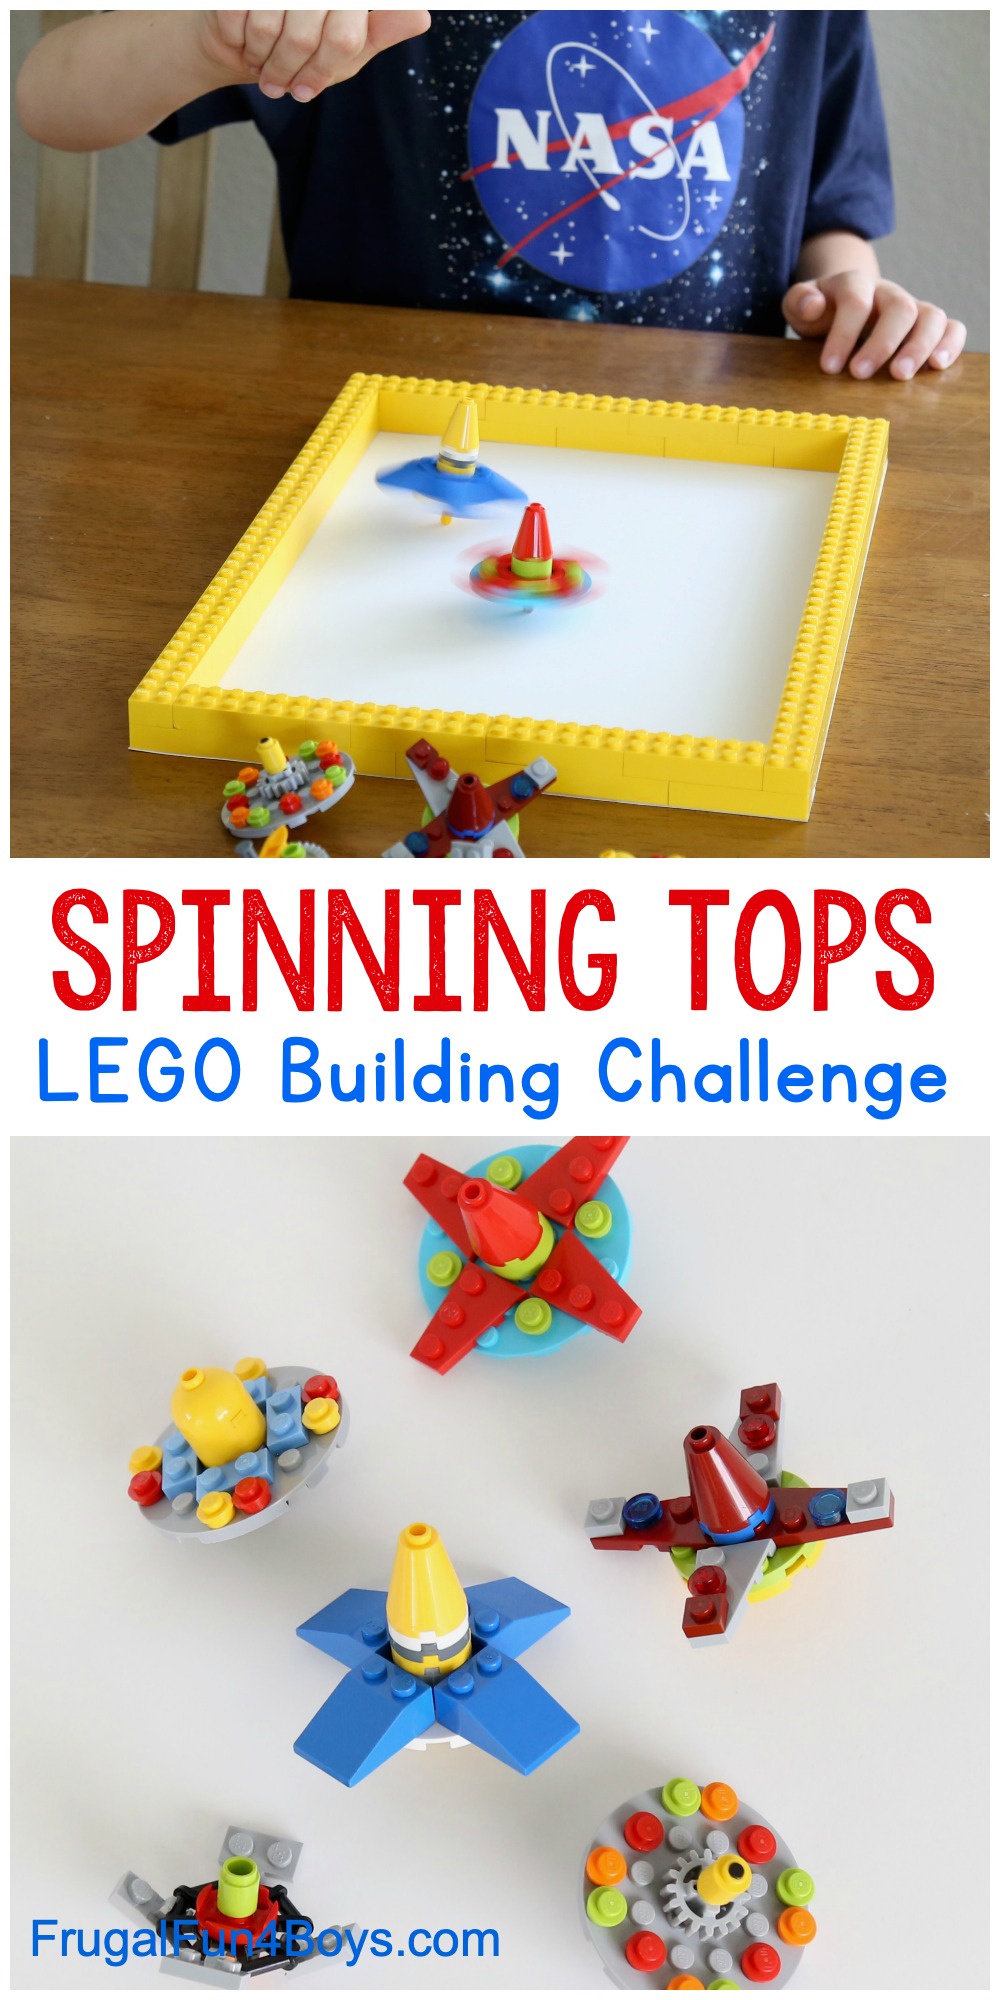 Spinning Tops LEGO Building Idea - Frugal Fun For Boys and Girls